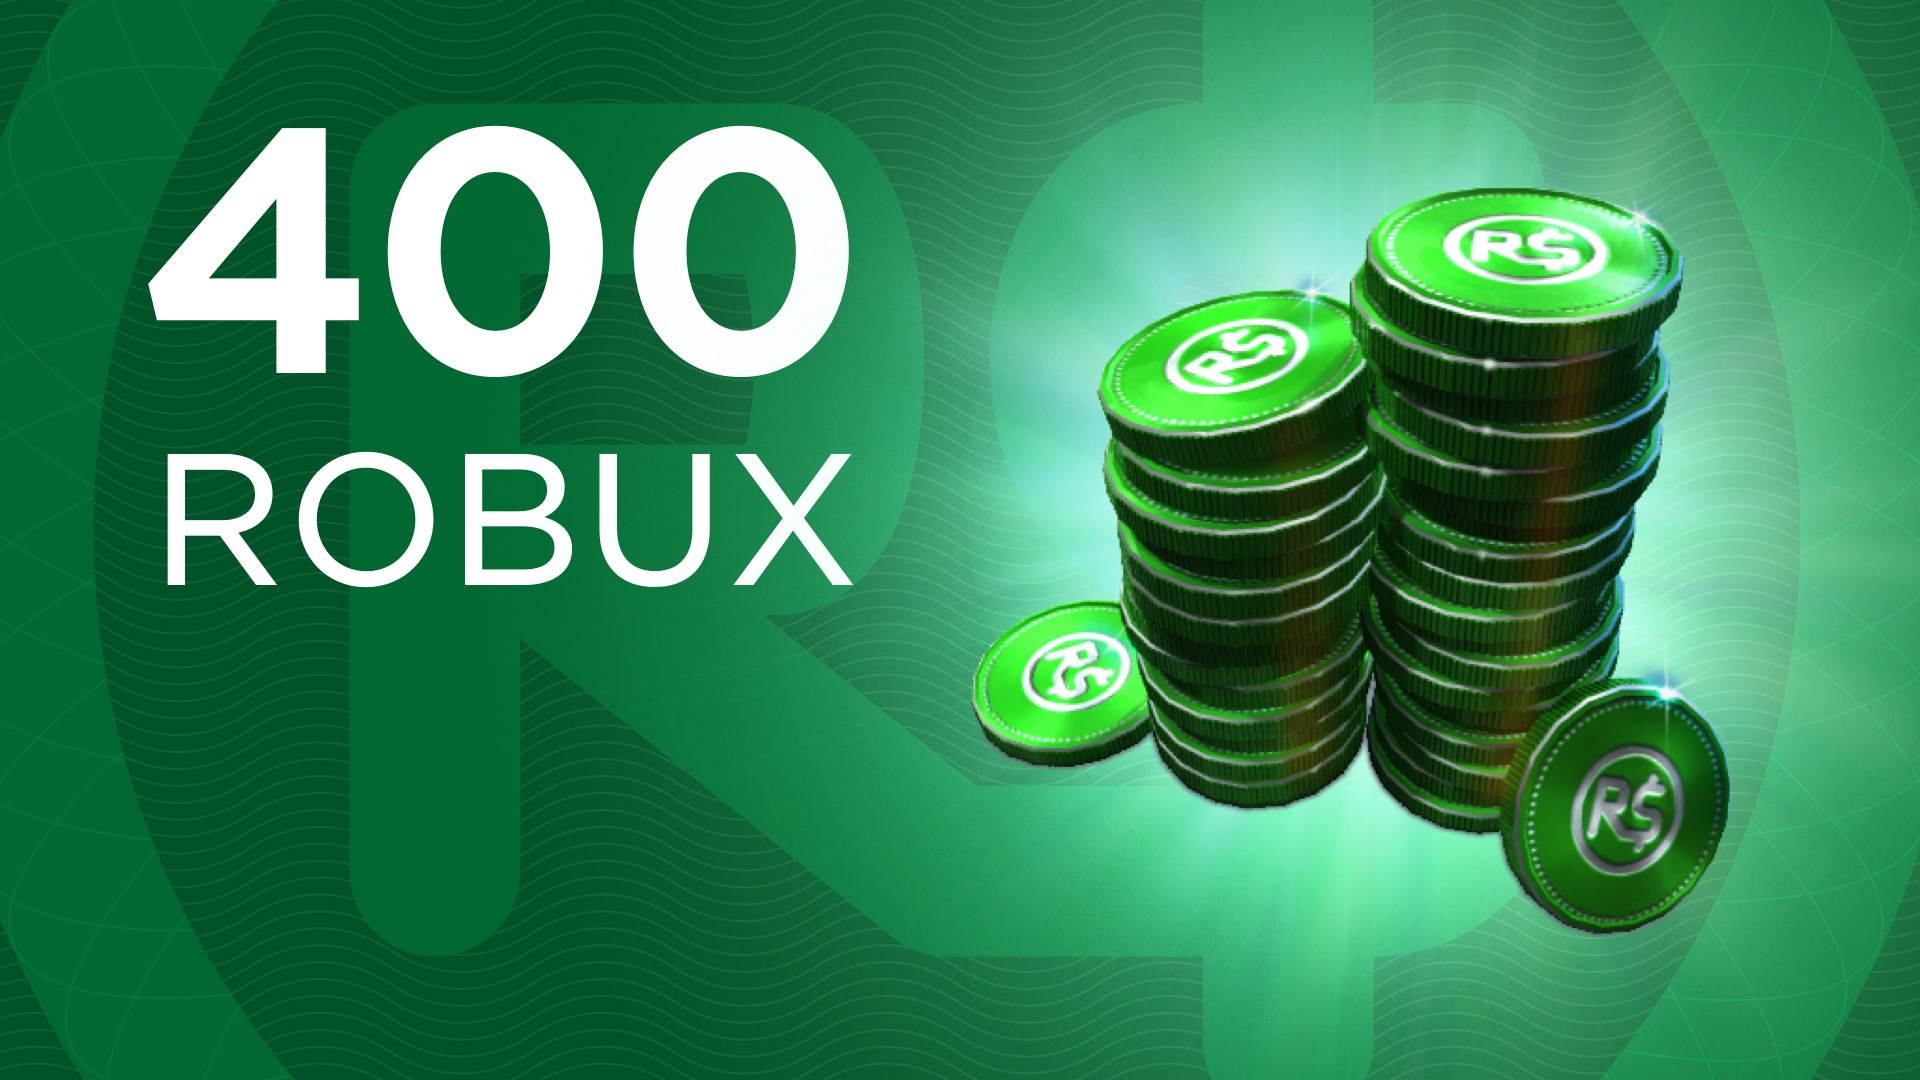 Buy 400 Robux For Xbox Microsoft Store - what good item can i buy with one robux